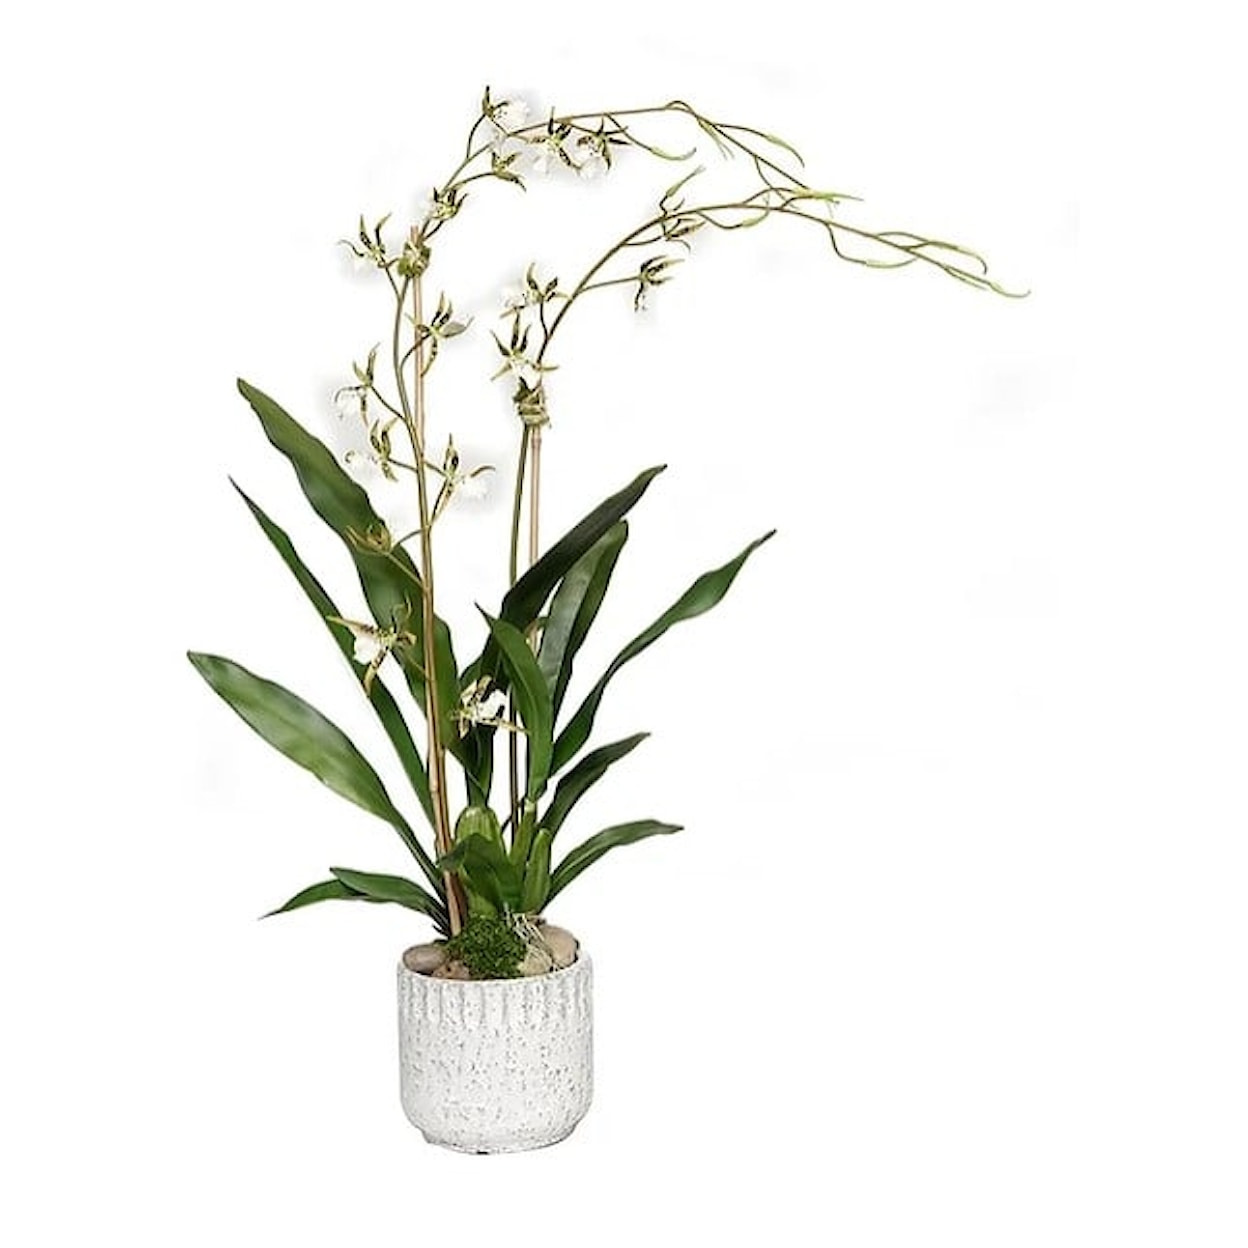 The Ivy Guild Orchids Kanab Pot with Brassia Orchid